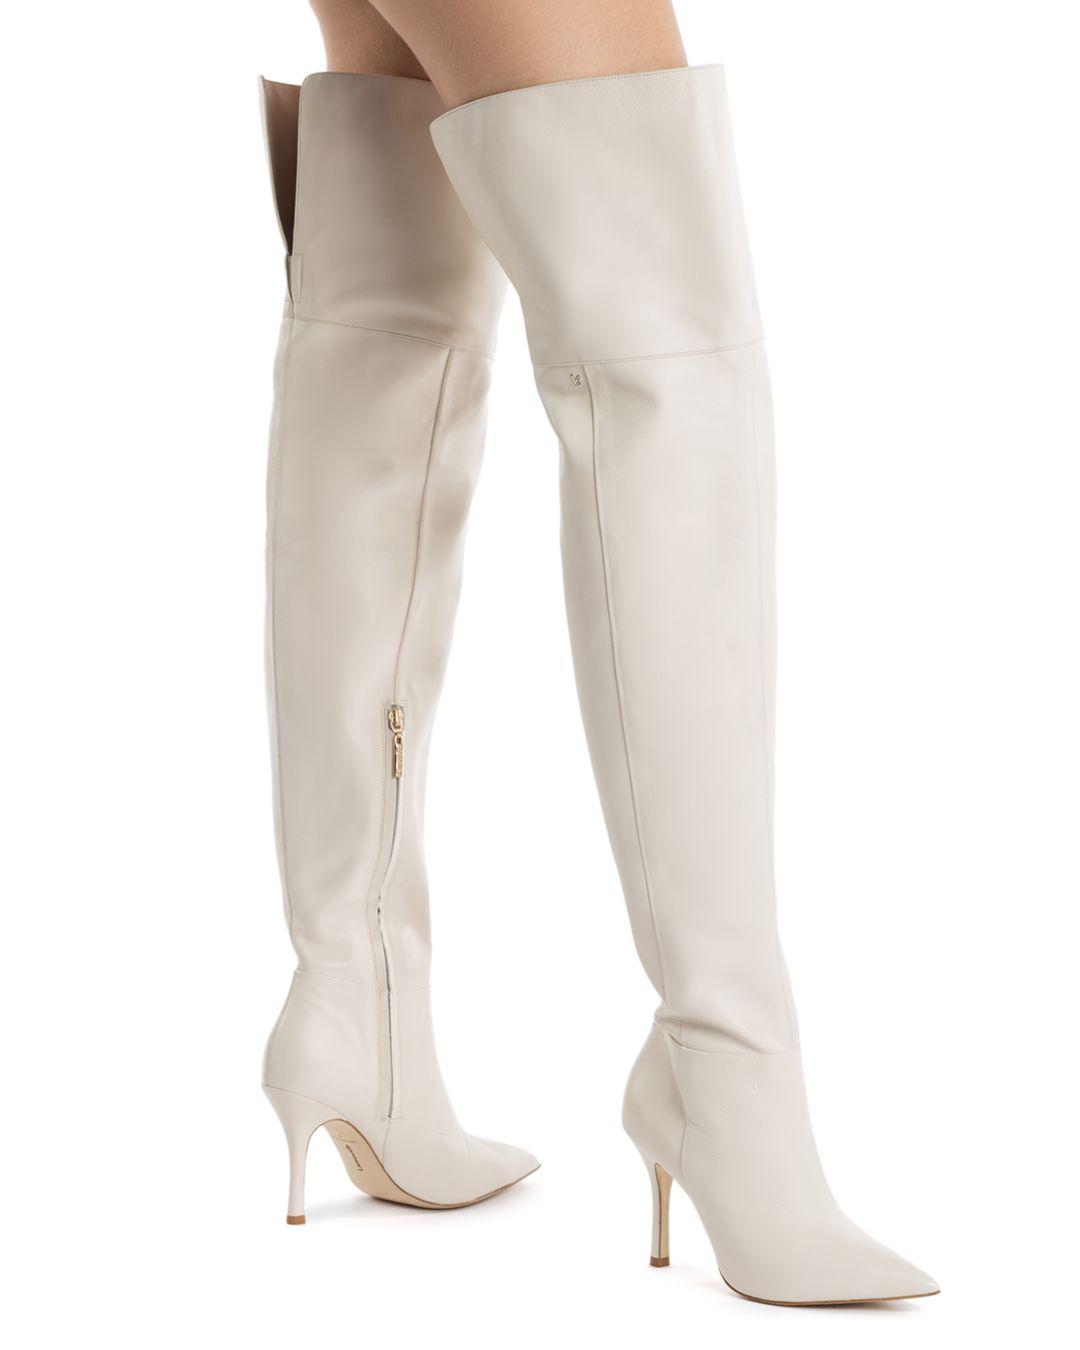 Larroude Kate Pointed Toe Over - The - Knee High Heel Boots in Natural ...